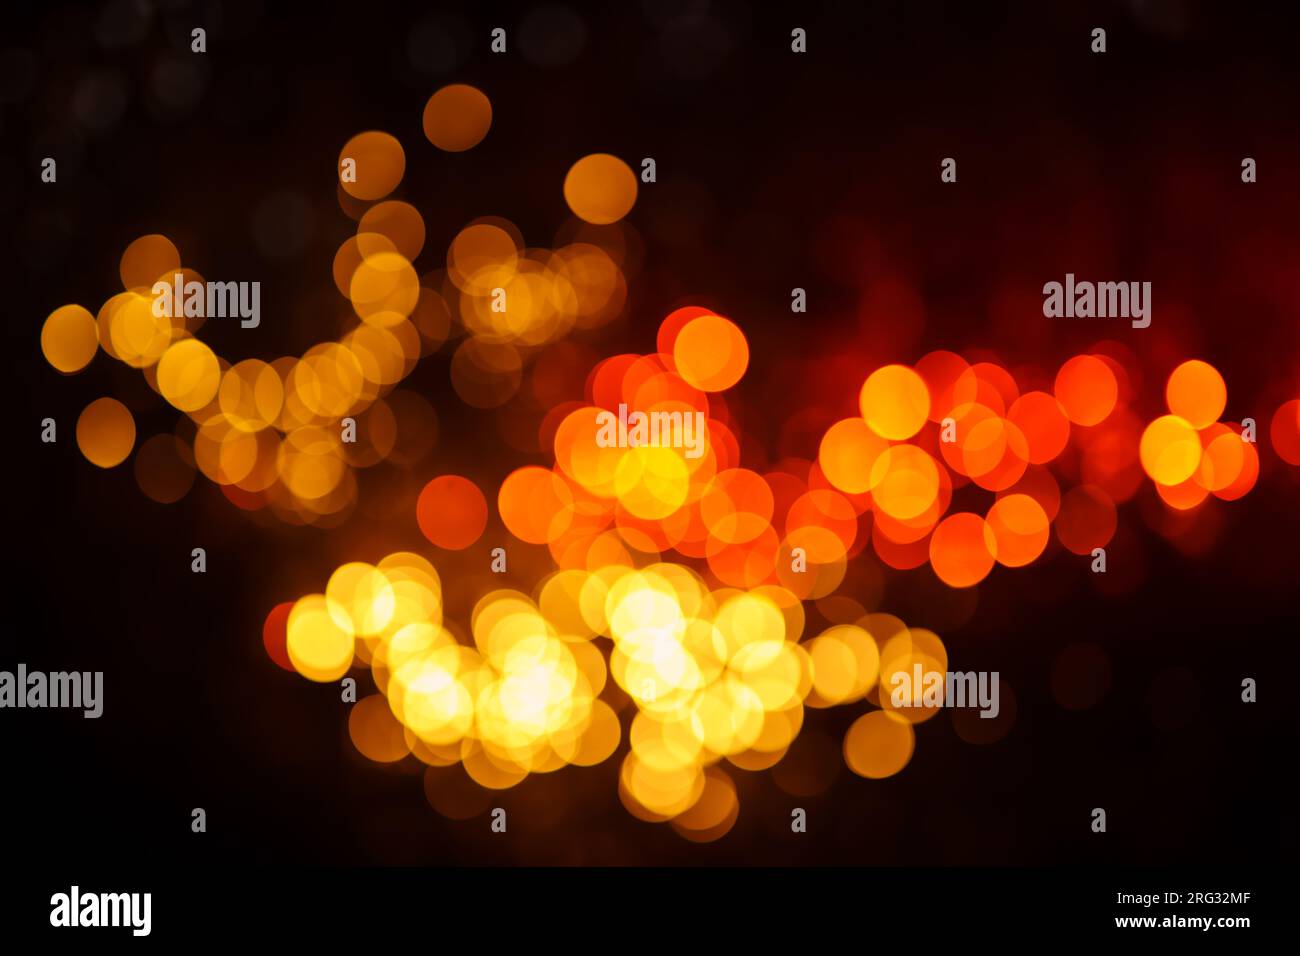 Abstract dark background with defocused lights Stock Photo